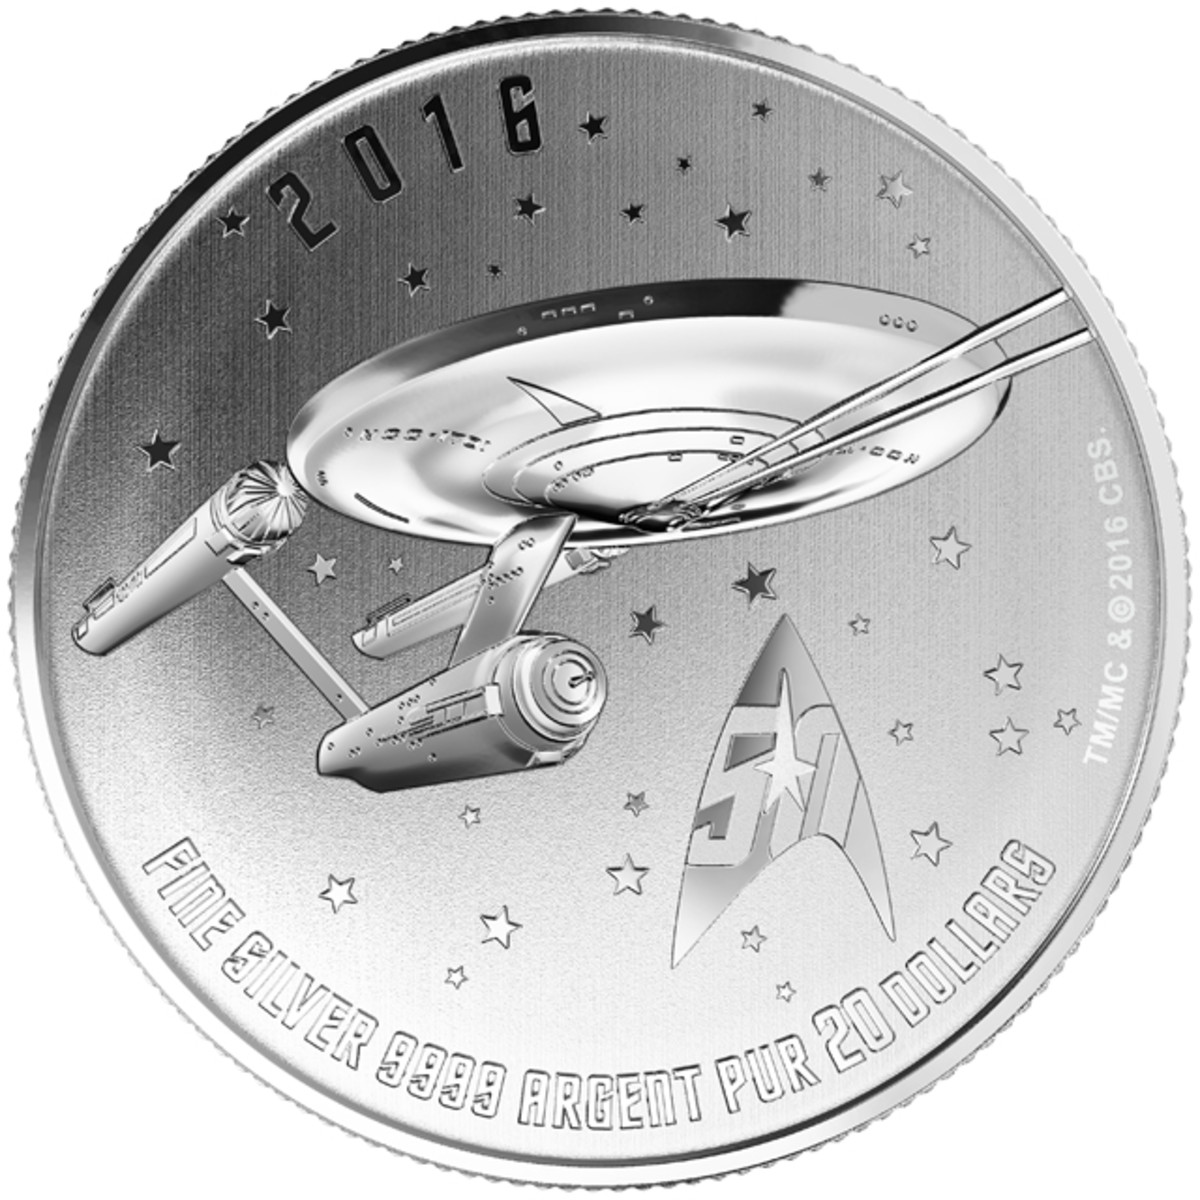 U.S.S. Enterprise blasts a locked-on target on an “affordable” BU silver $20. Image courtesy RCM. TM & © 2016 CBS Studios Inc. STAR TREK and related marks and logos are trademarks of CBS Studios Inc. All Rights Reserved.